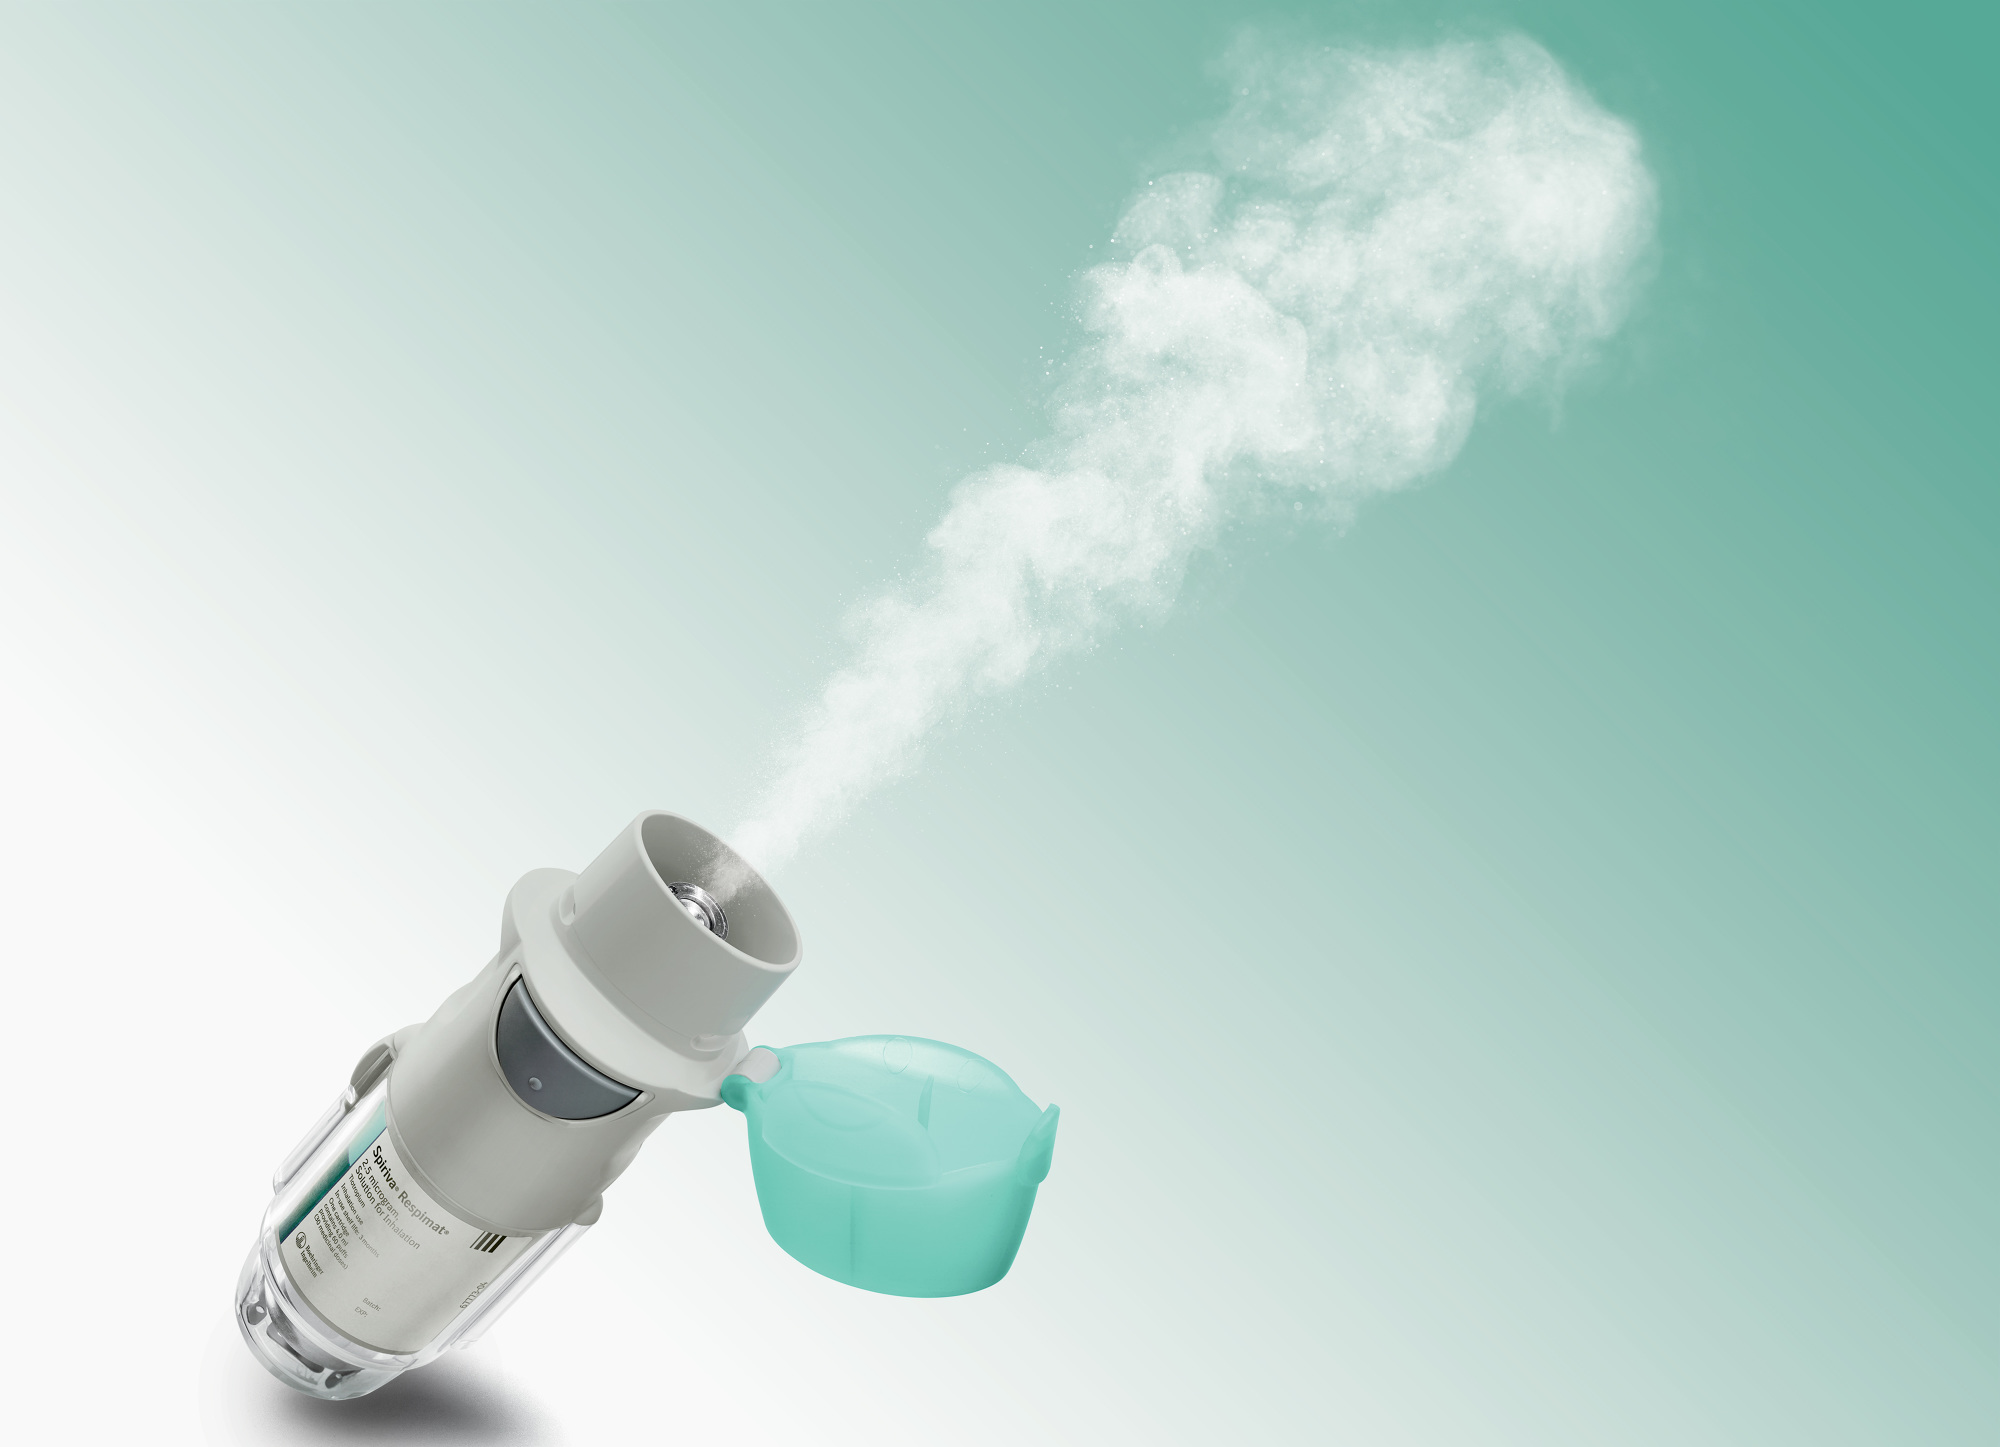 Spiriva Respimat Safe as Add-On Therapy for Young Asthmatics